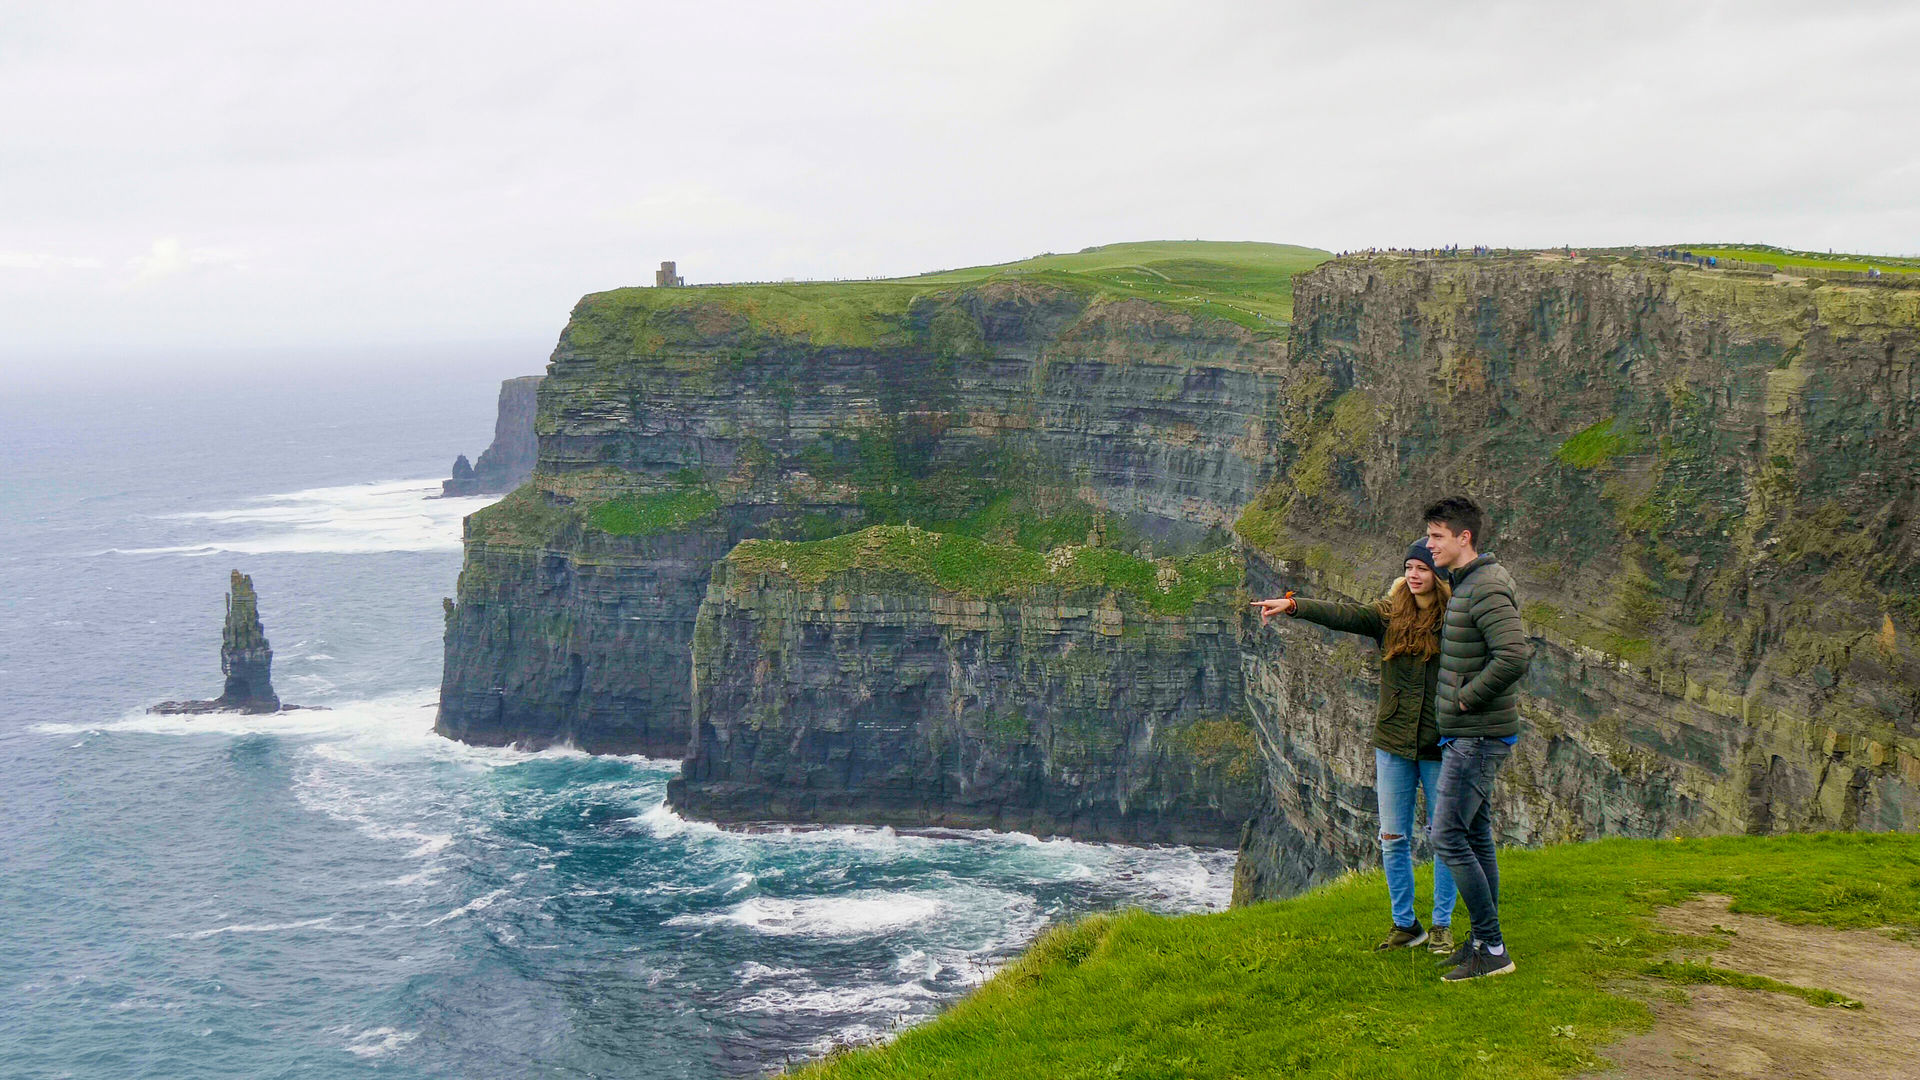 Tagestour: Cliffs of Moher, The Burren & Galway 